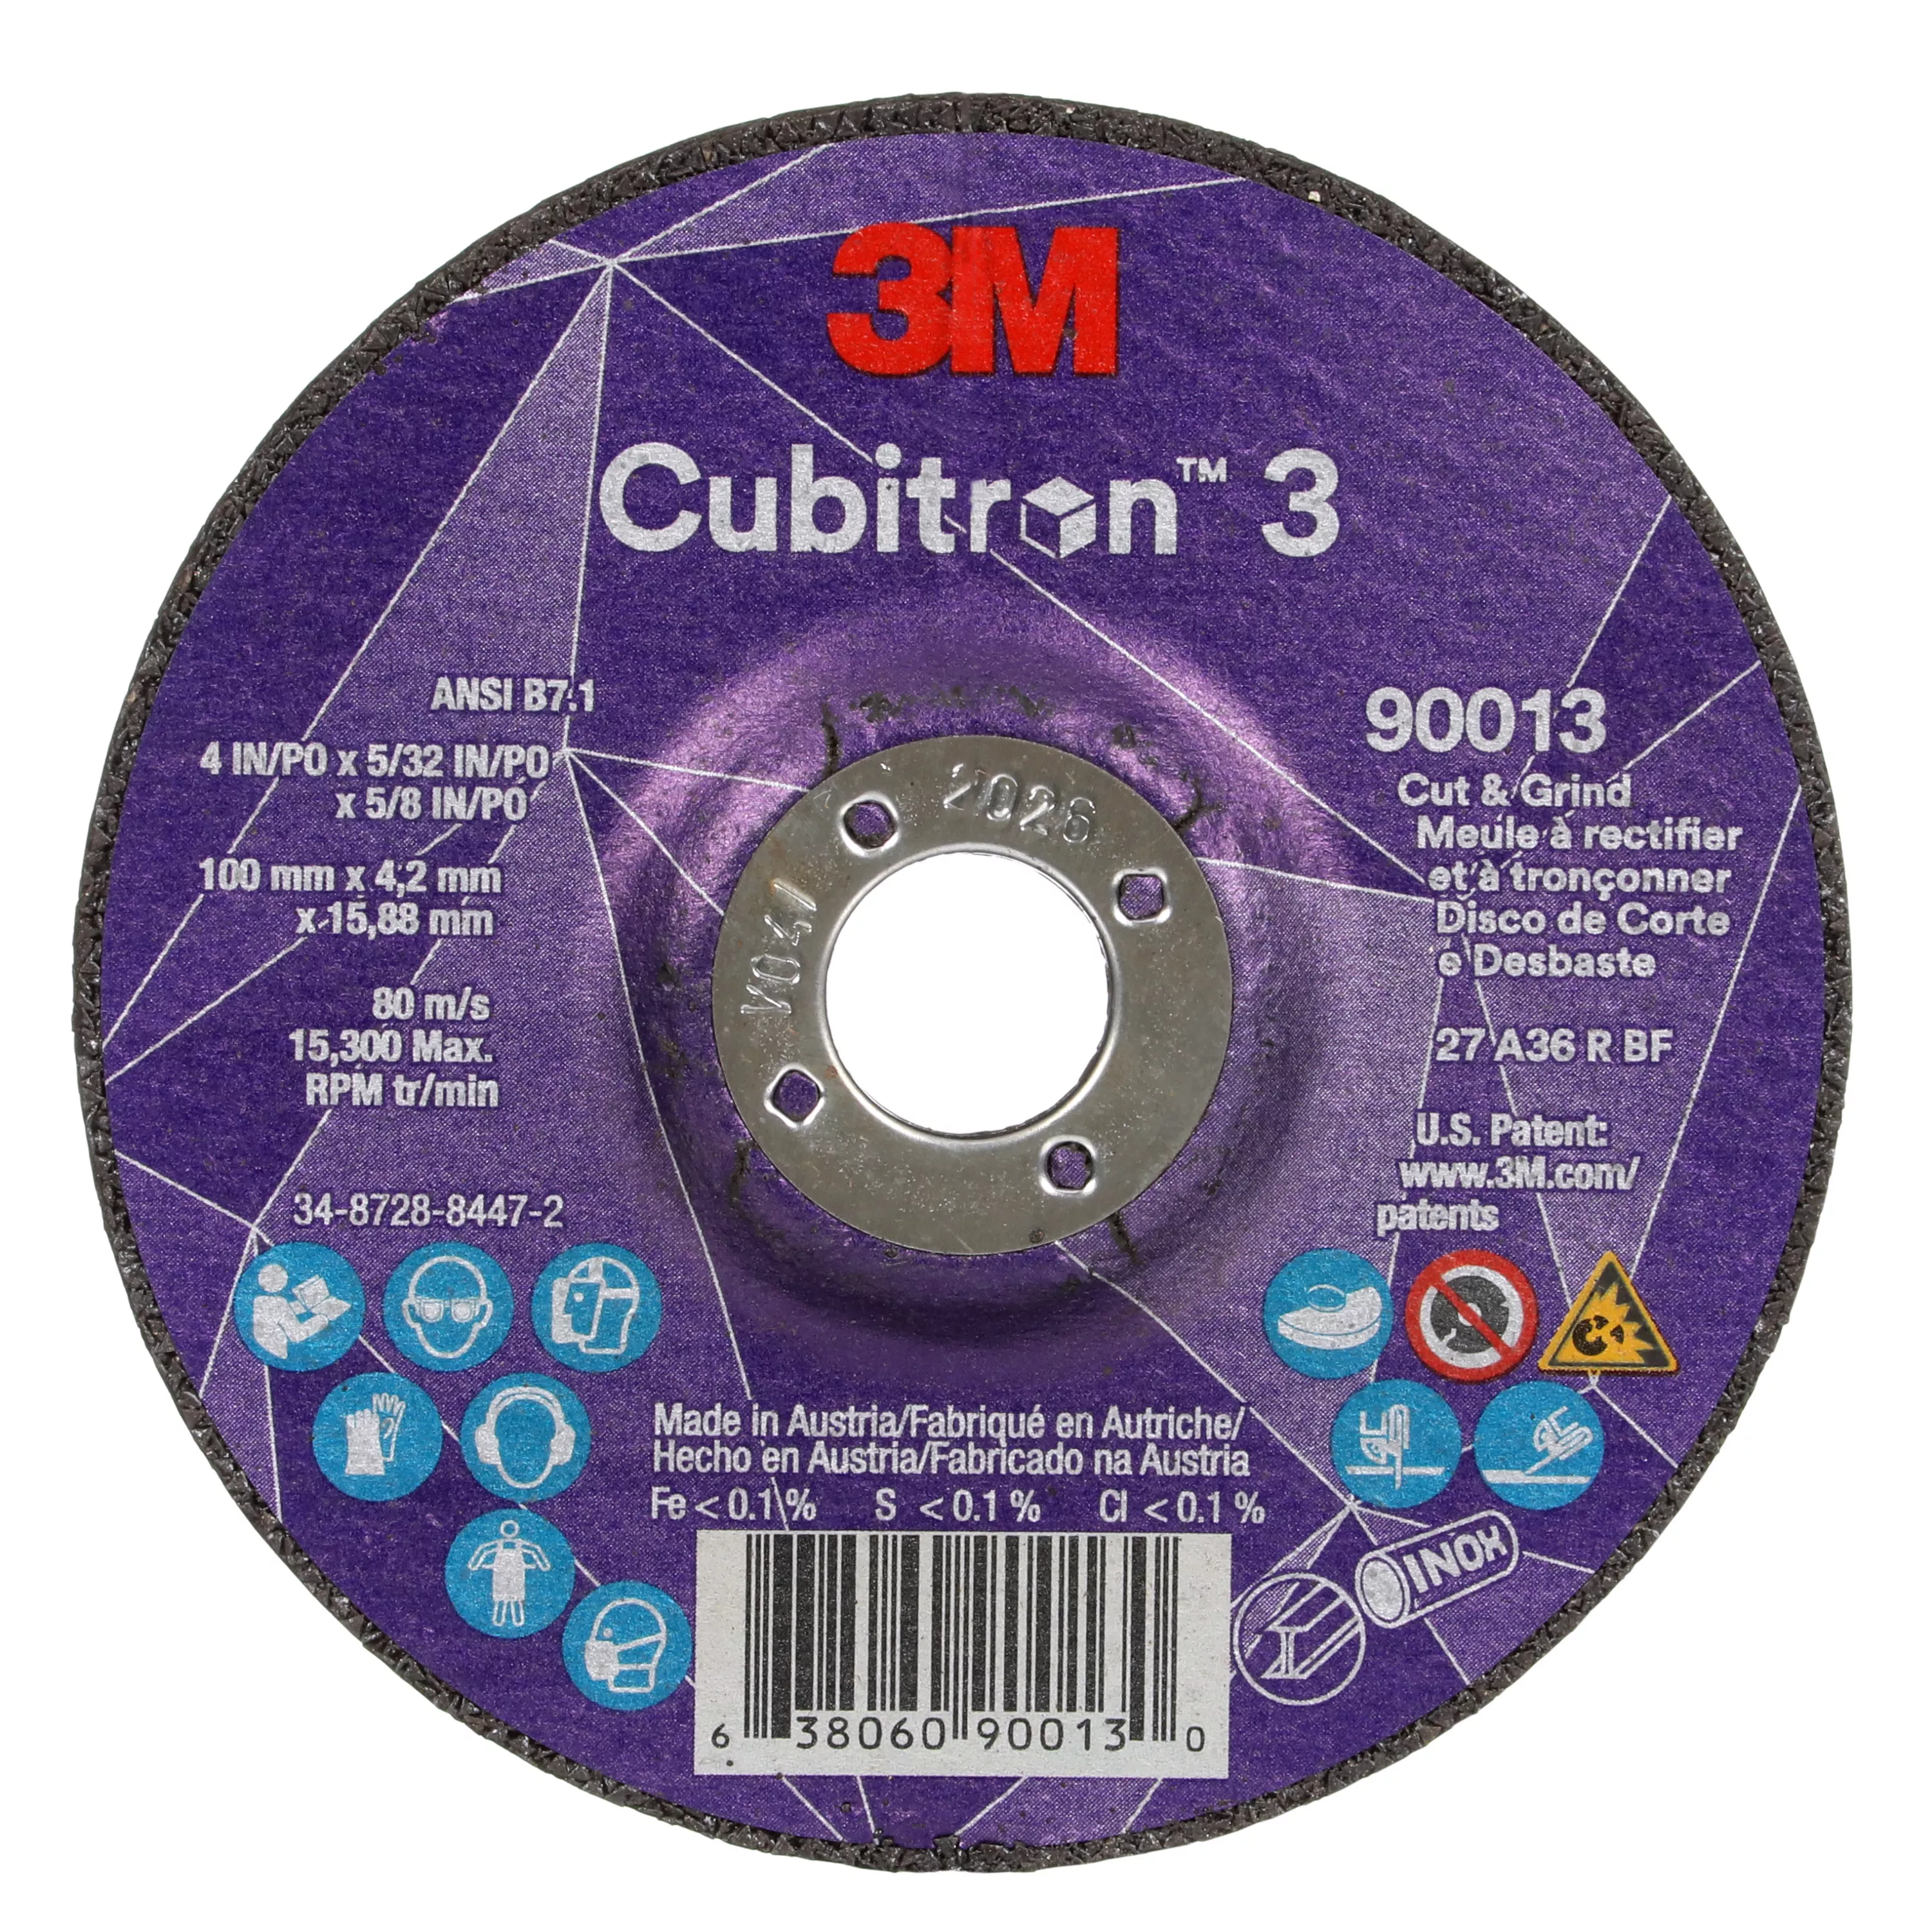 3M™ Cubitron™ 3 Cut and Grind Wheel, 90013, 36+, T27, 4 in x 5/32 in x
5/8 in (100 x 4.2 x 15.88 mm), ANSI, 10/Pack, 20 ea/Case